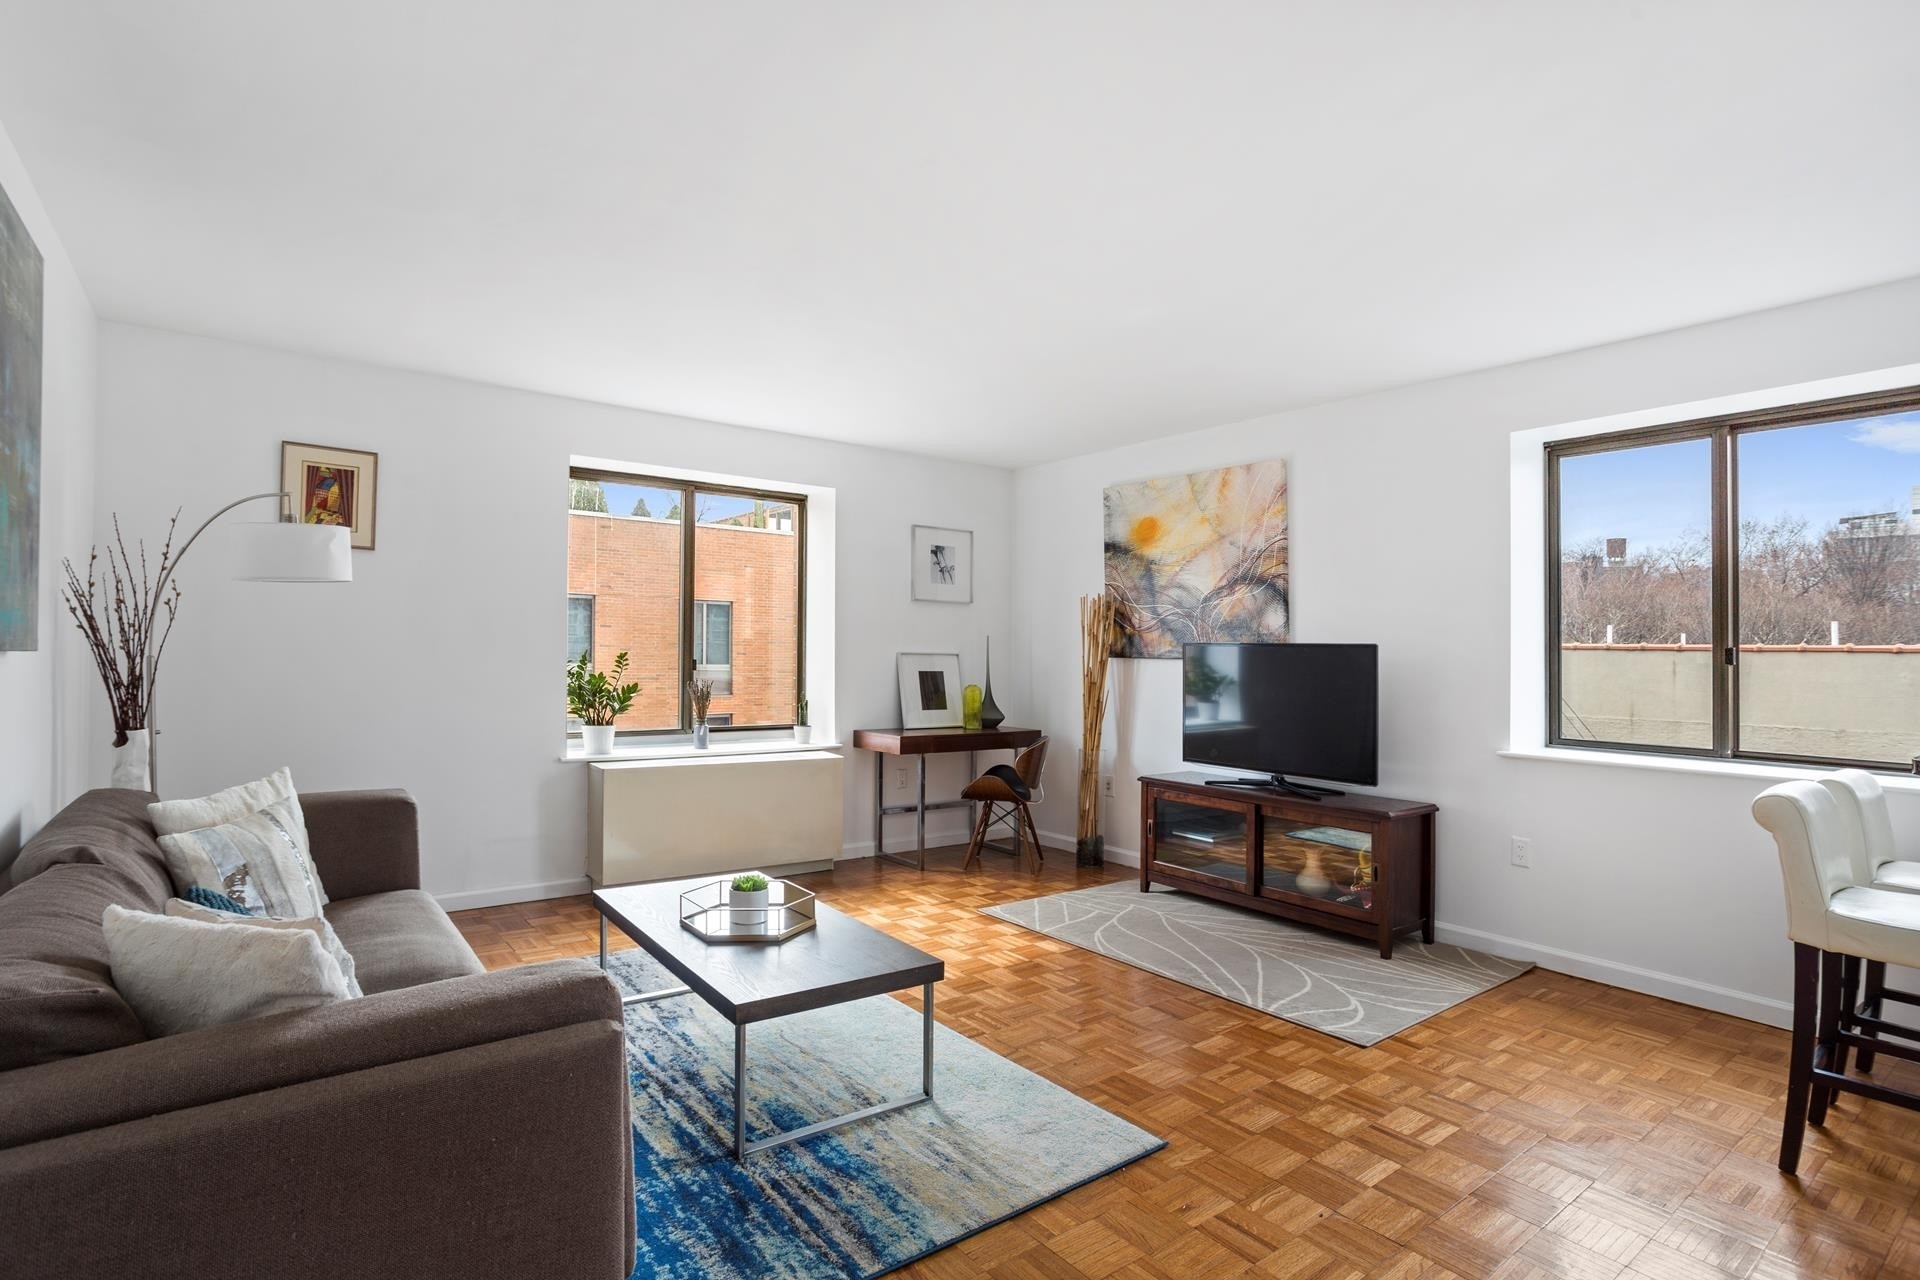 Property at Strivers Gardens Condominium, 300 West 135th St, 7A New York